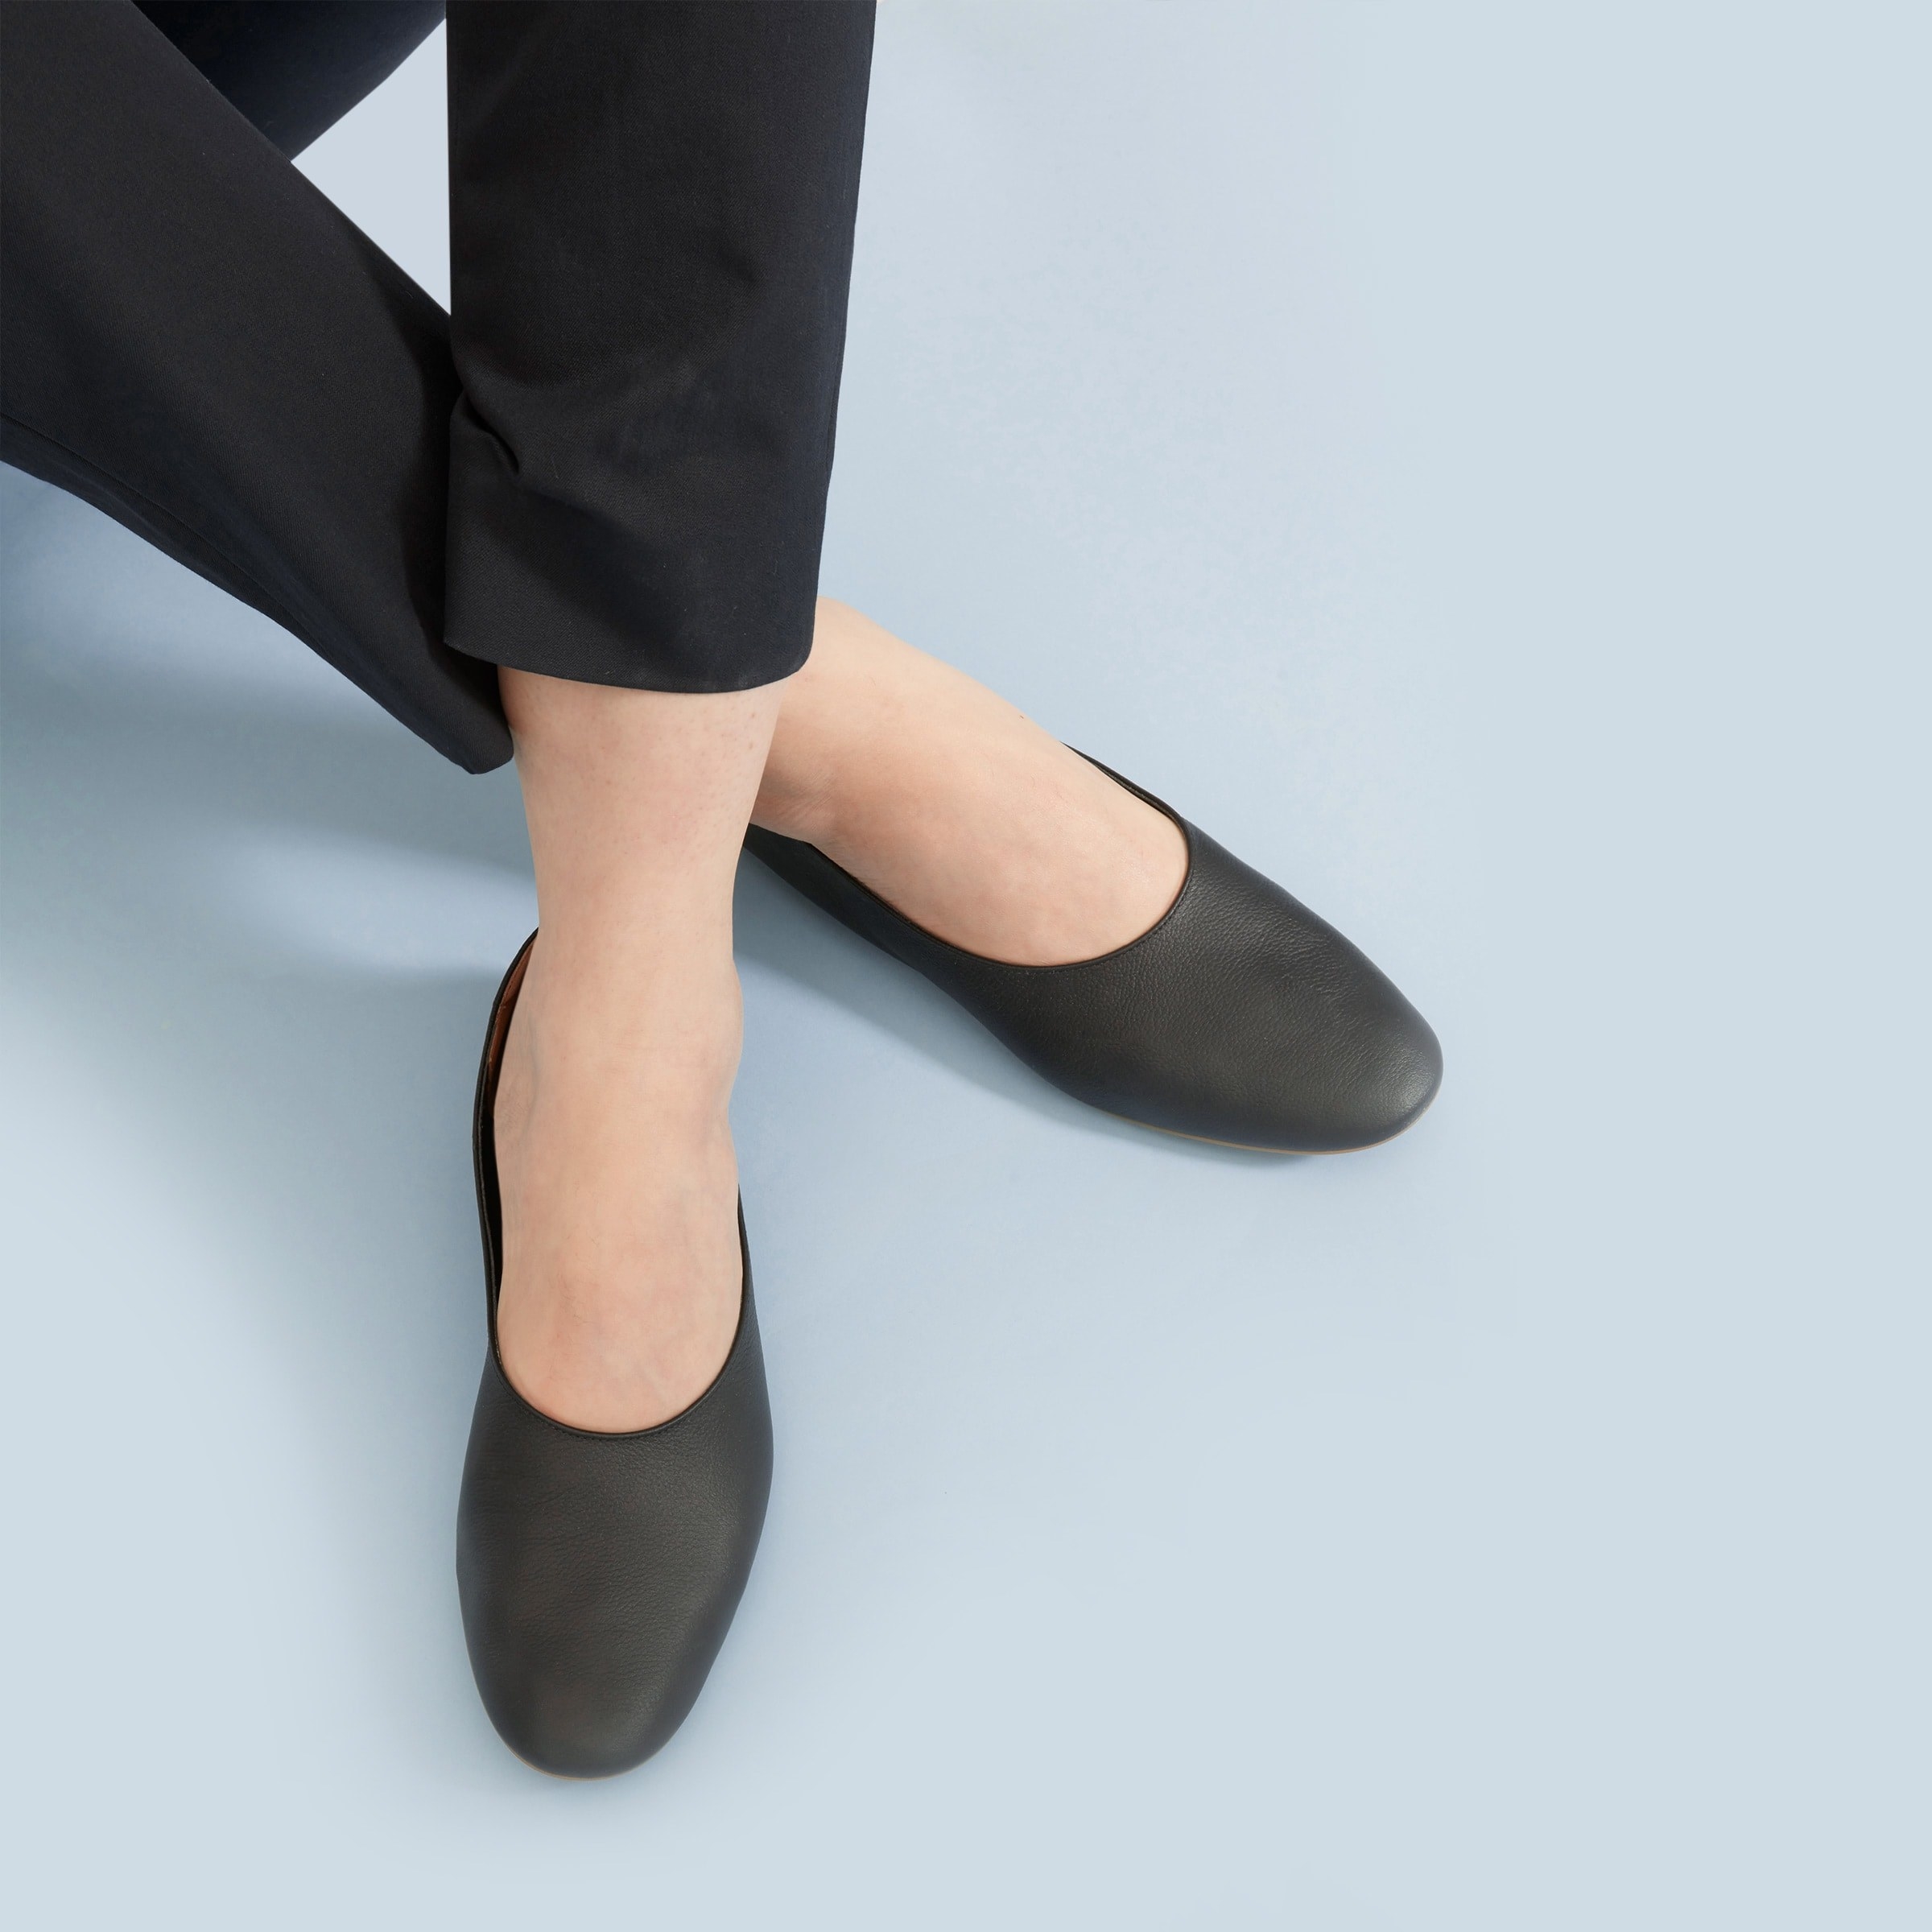 Model wearing the flats in black showing off the rounded toe